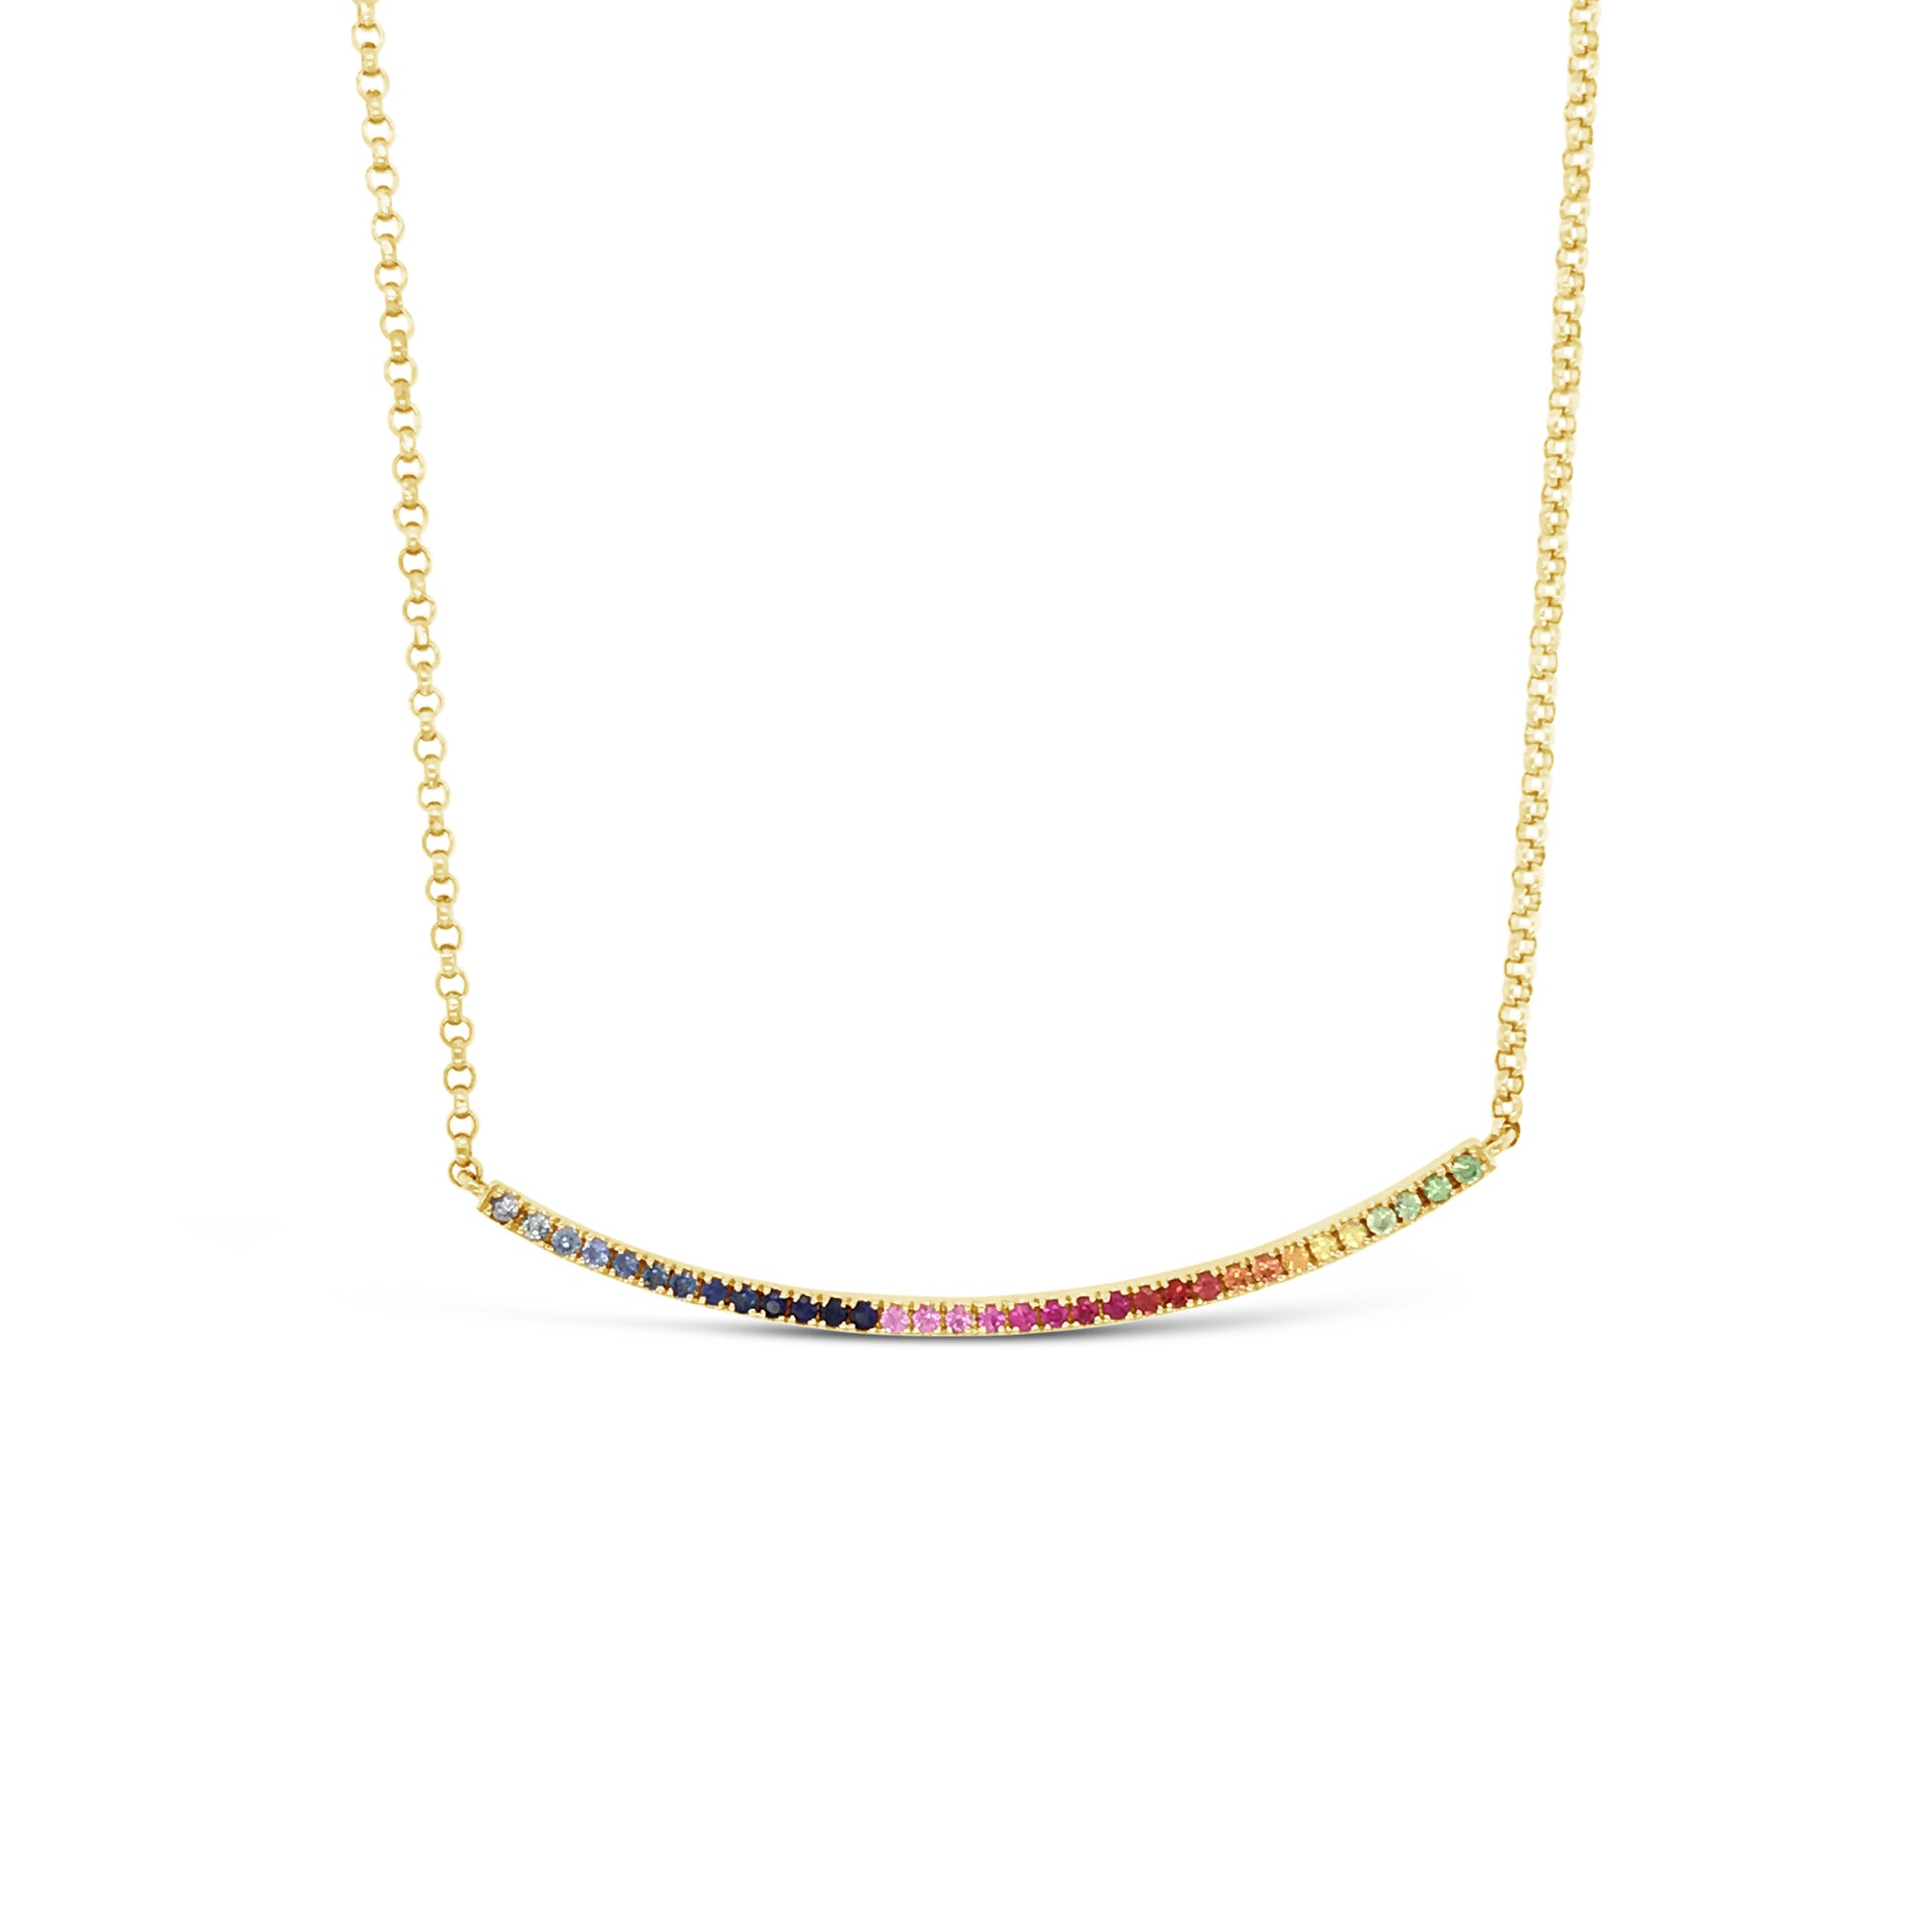 Rainbow Bar Necklace  -14k gold weighing 3.46 grams  -34 multi-color stones weighing .34 carats